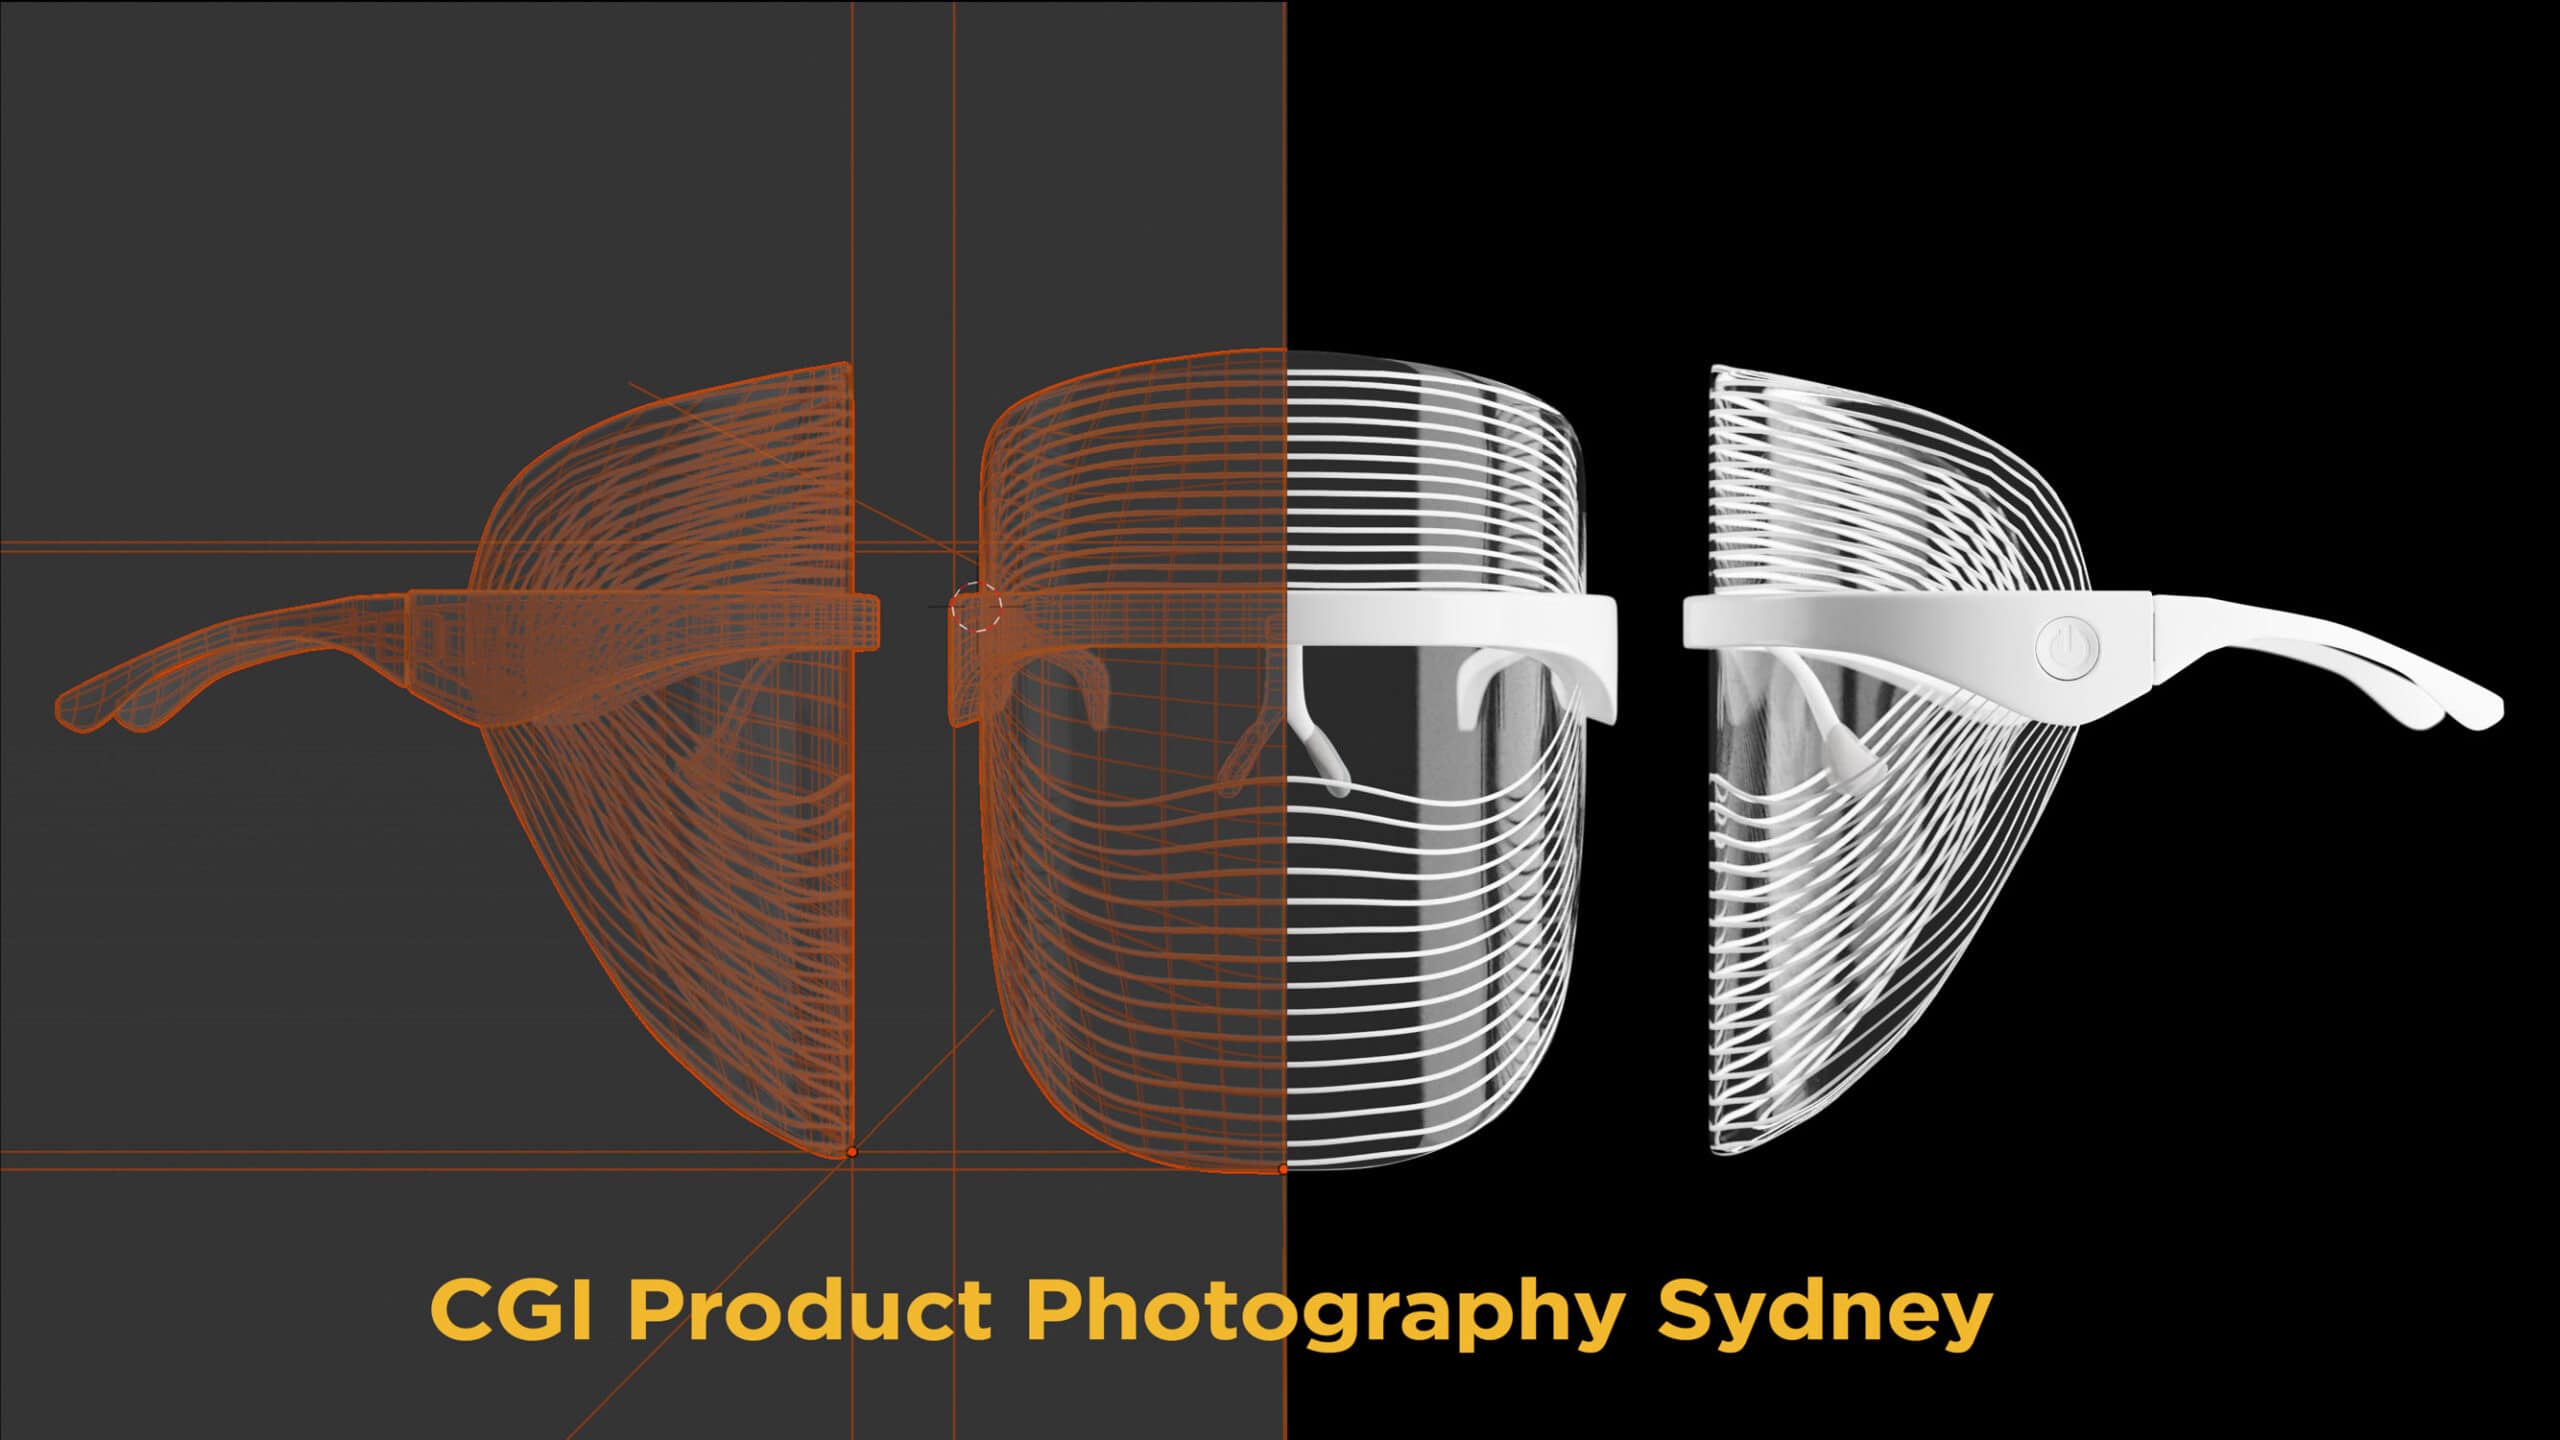 CGI Product Photograpy Sydney with Lubov Skin